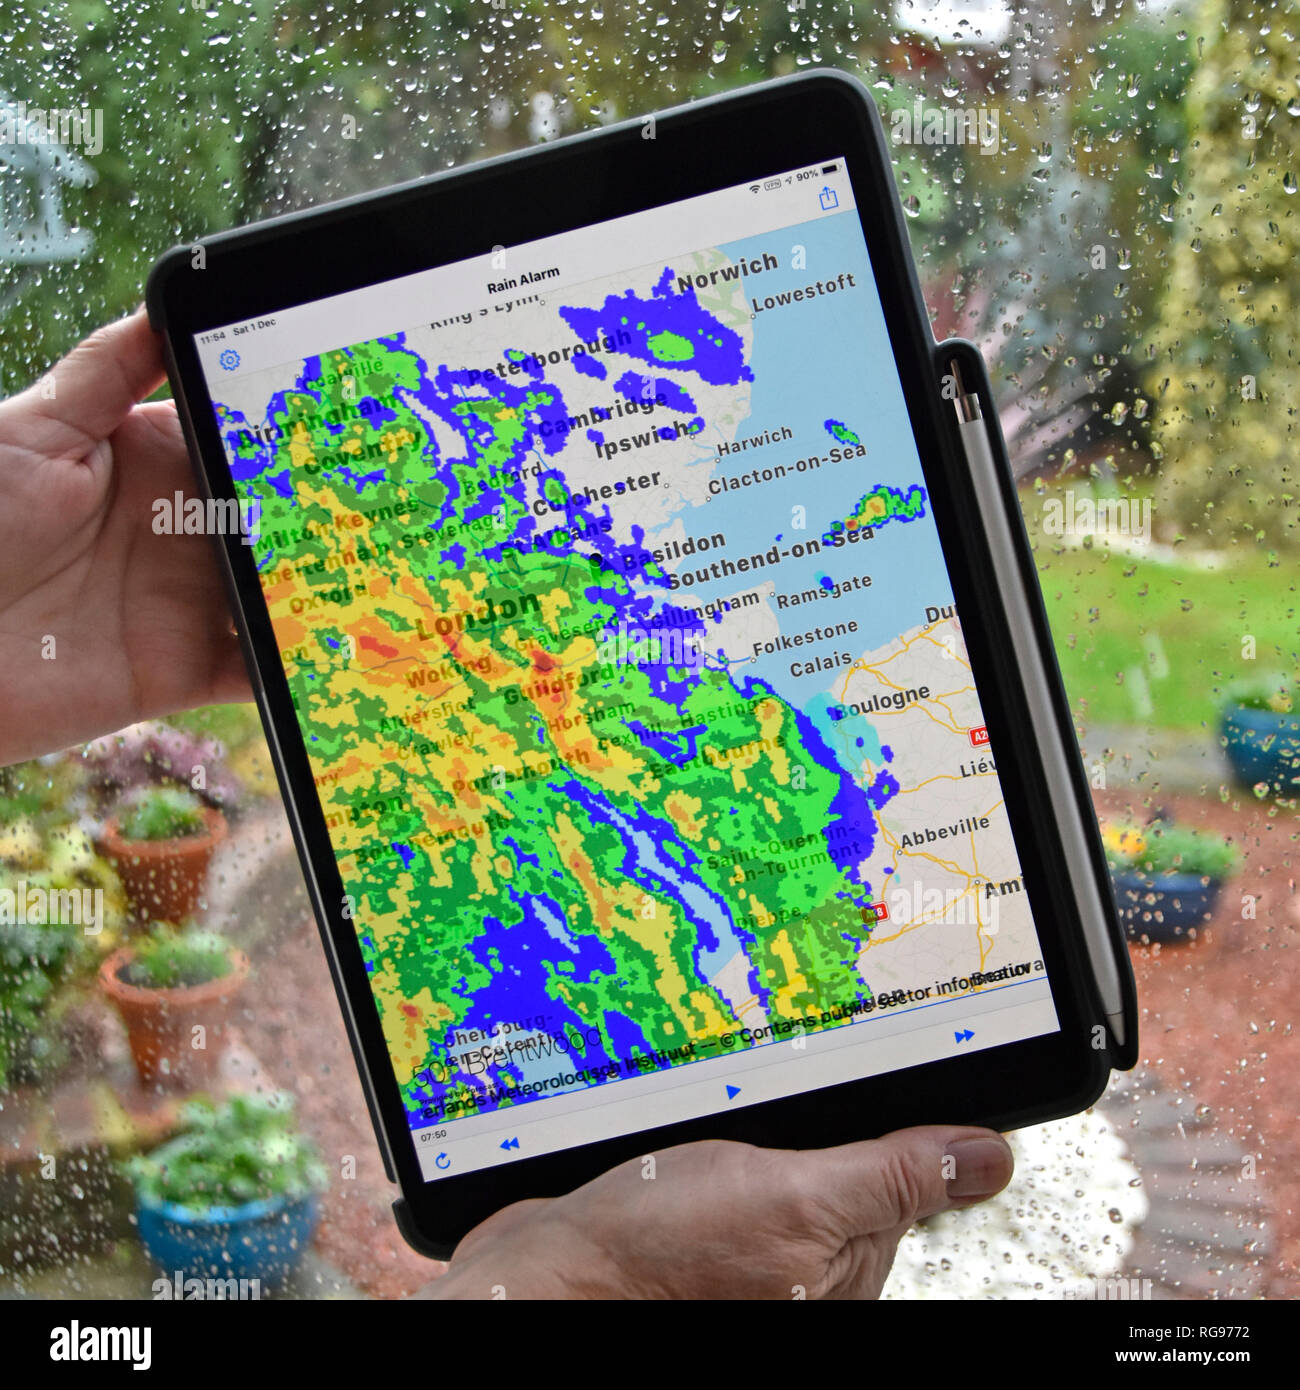 Woman hands holding ipad pro tablet rain alarm app uses real time colour radar data superimposing rainfall on local map wet weather on window Essex UK Stock Photo